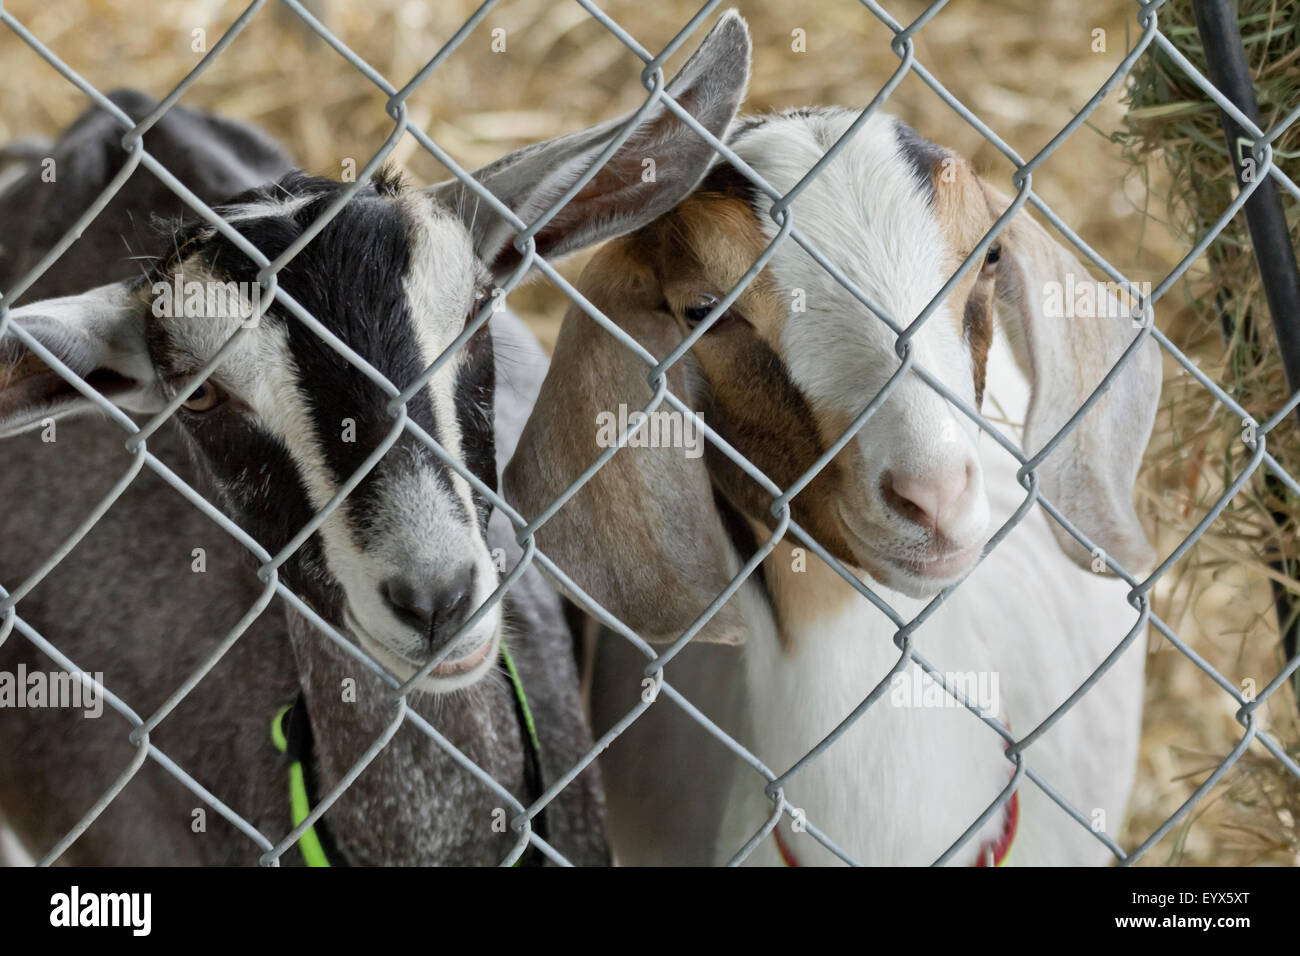 Cute young goats in pen behind fence on farm Stock Photo